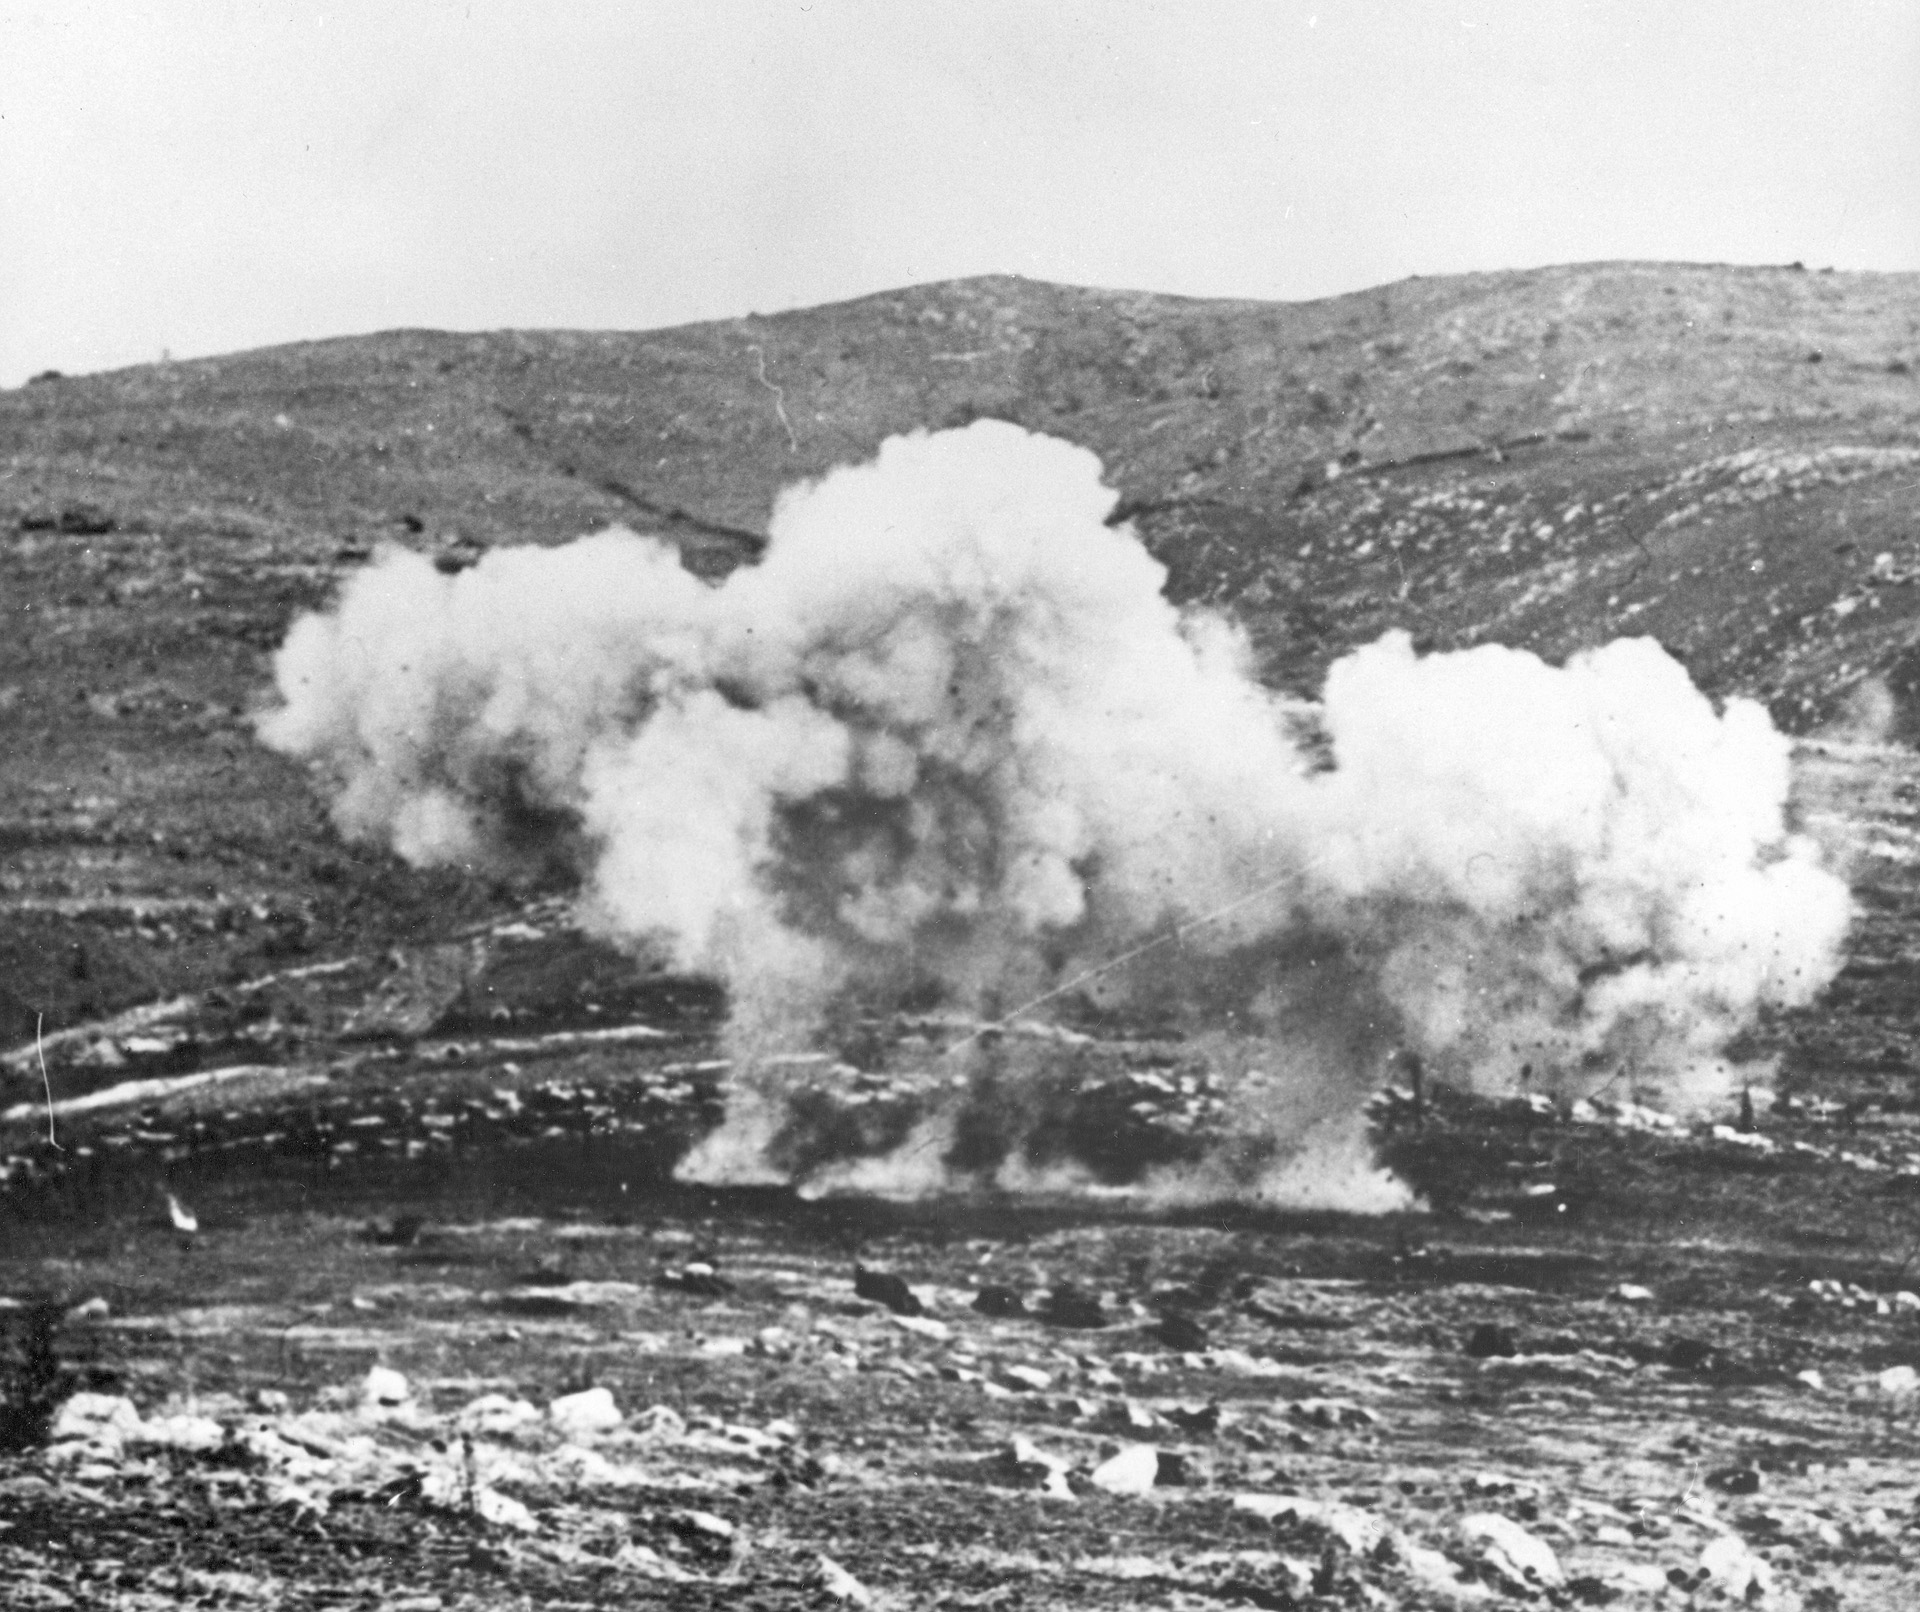 Greek and Italian forces clash violently at Epirus in northwestern Greece in February 1941. By the spring, it was obvious to Hitler that German troops would be required to save their Axis partner from embarrassment.